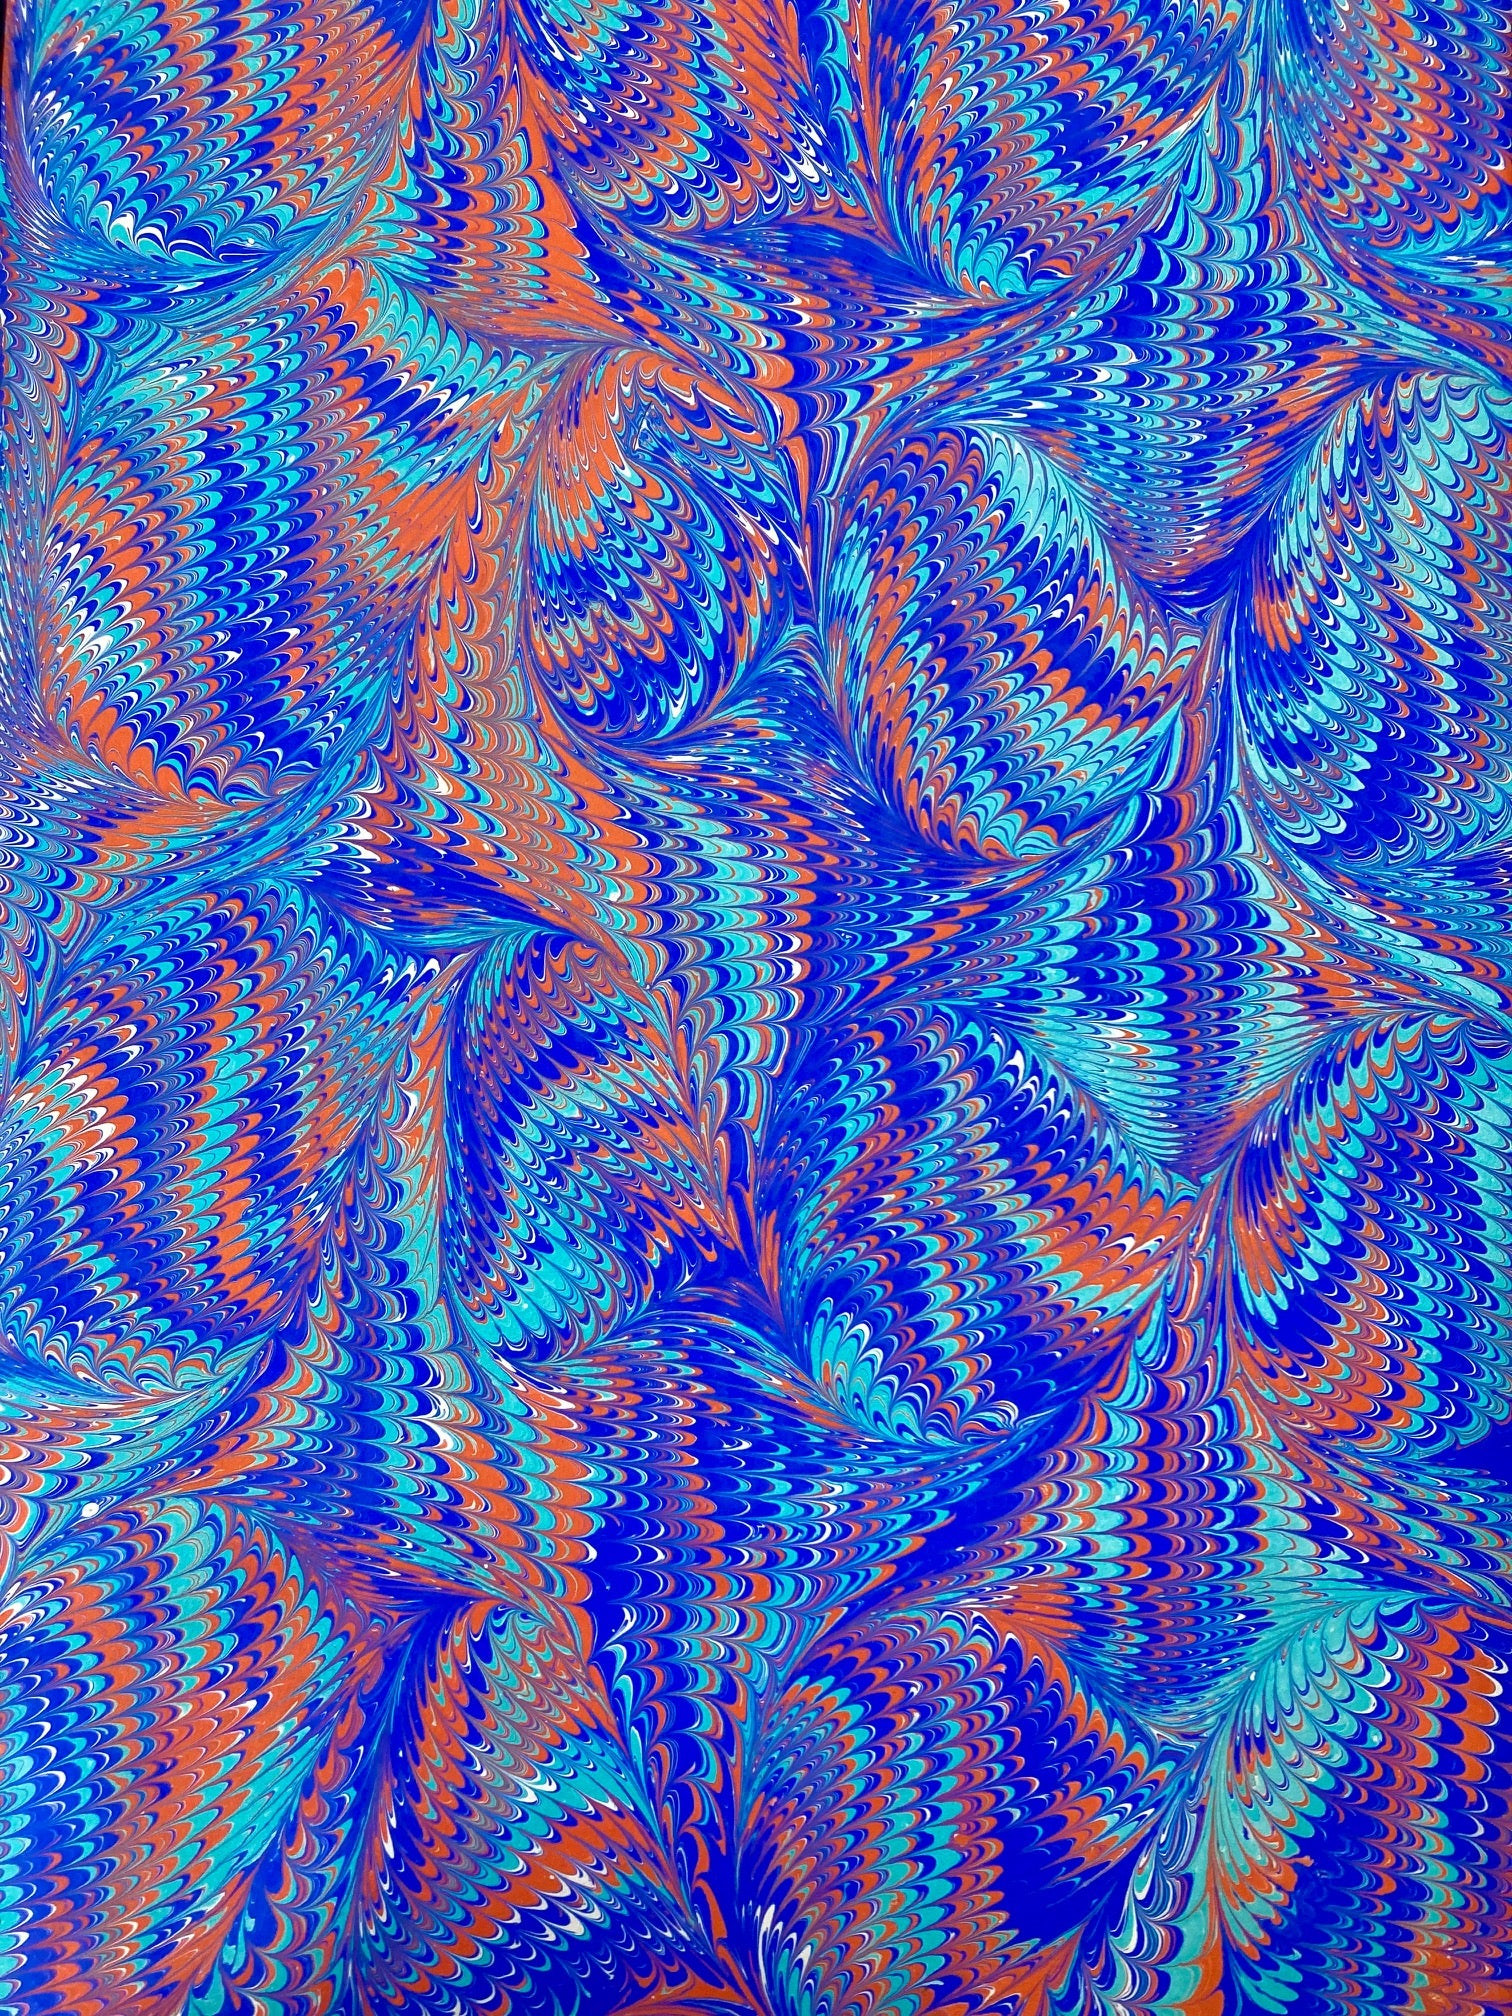 Ultramarine Turquoise and Orange Feathered Hand Marbled Paper